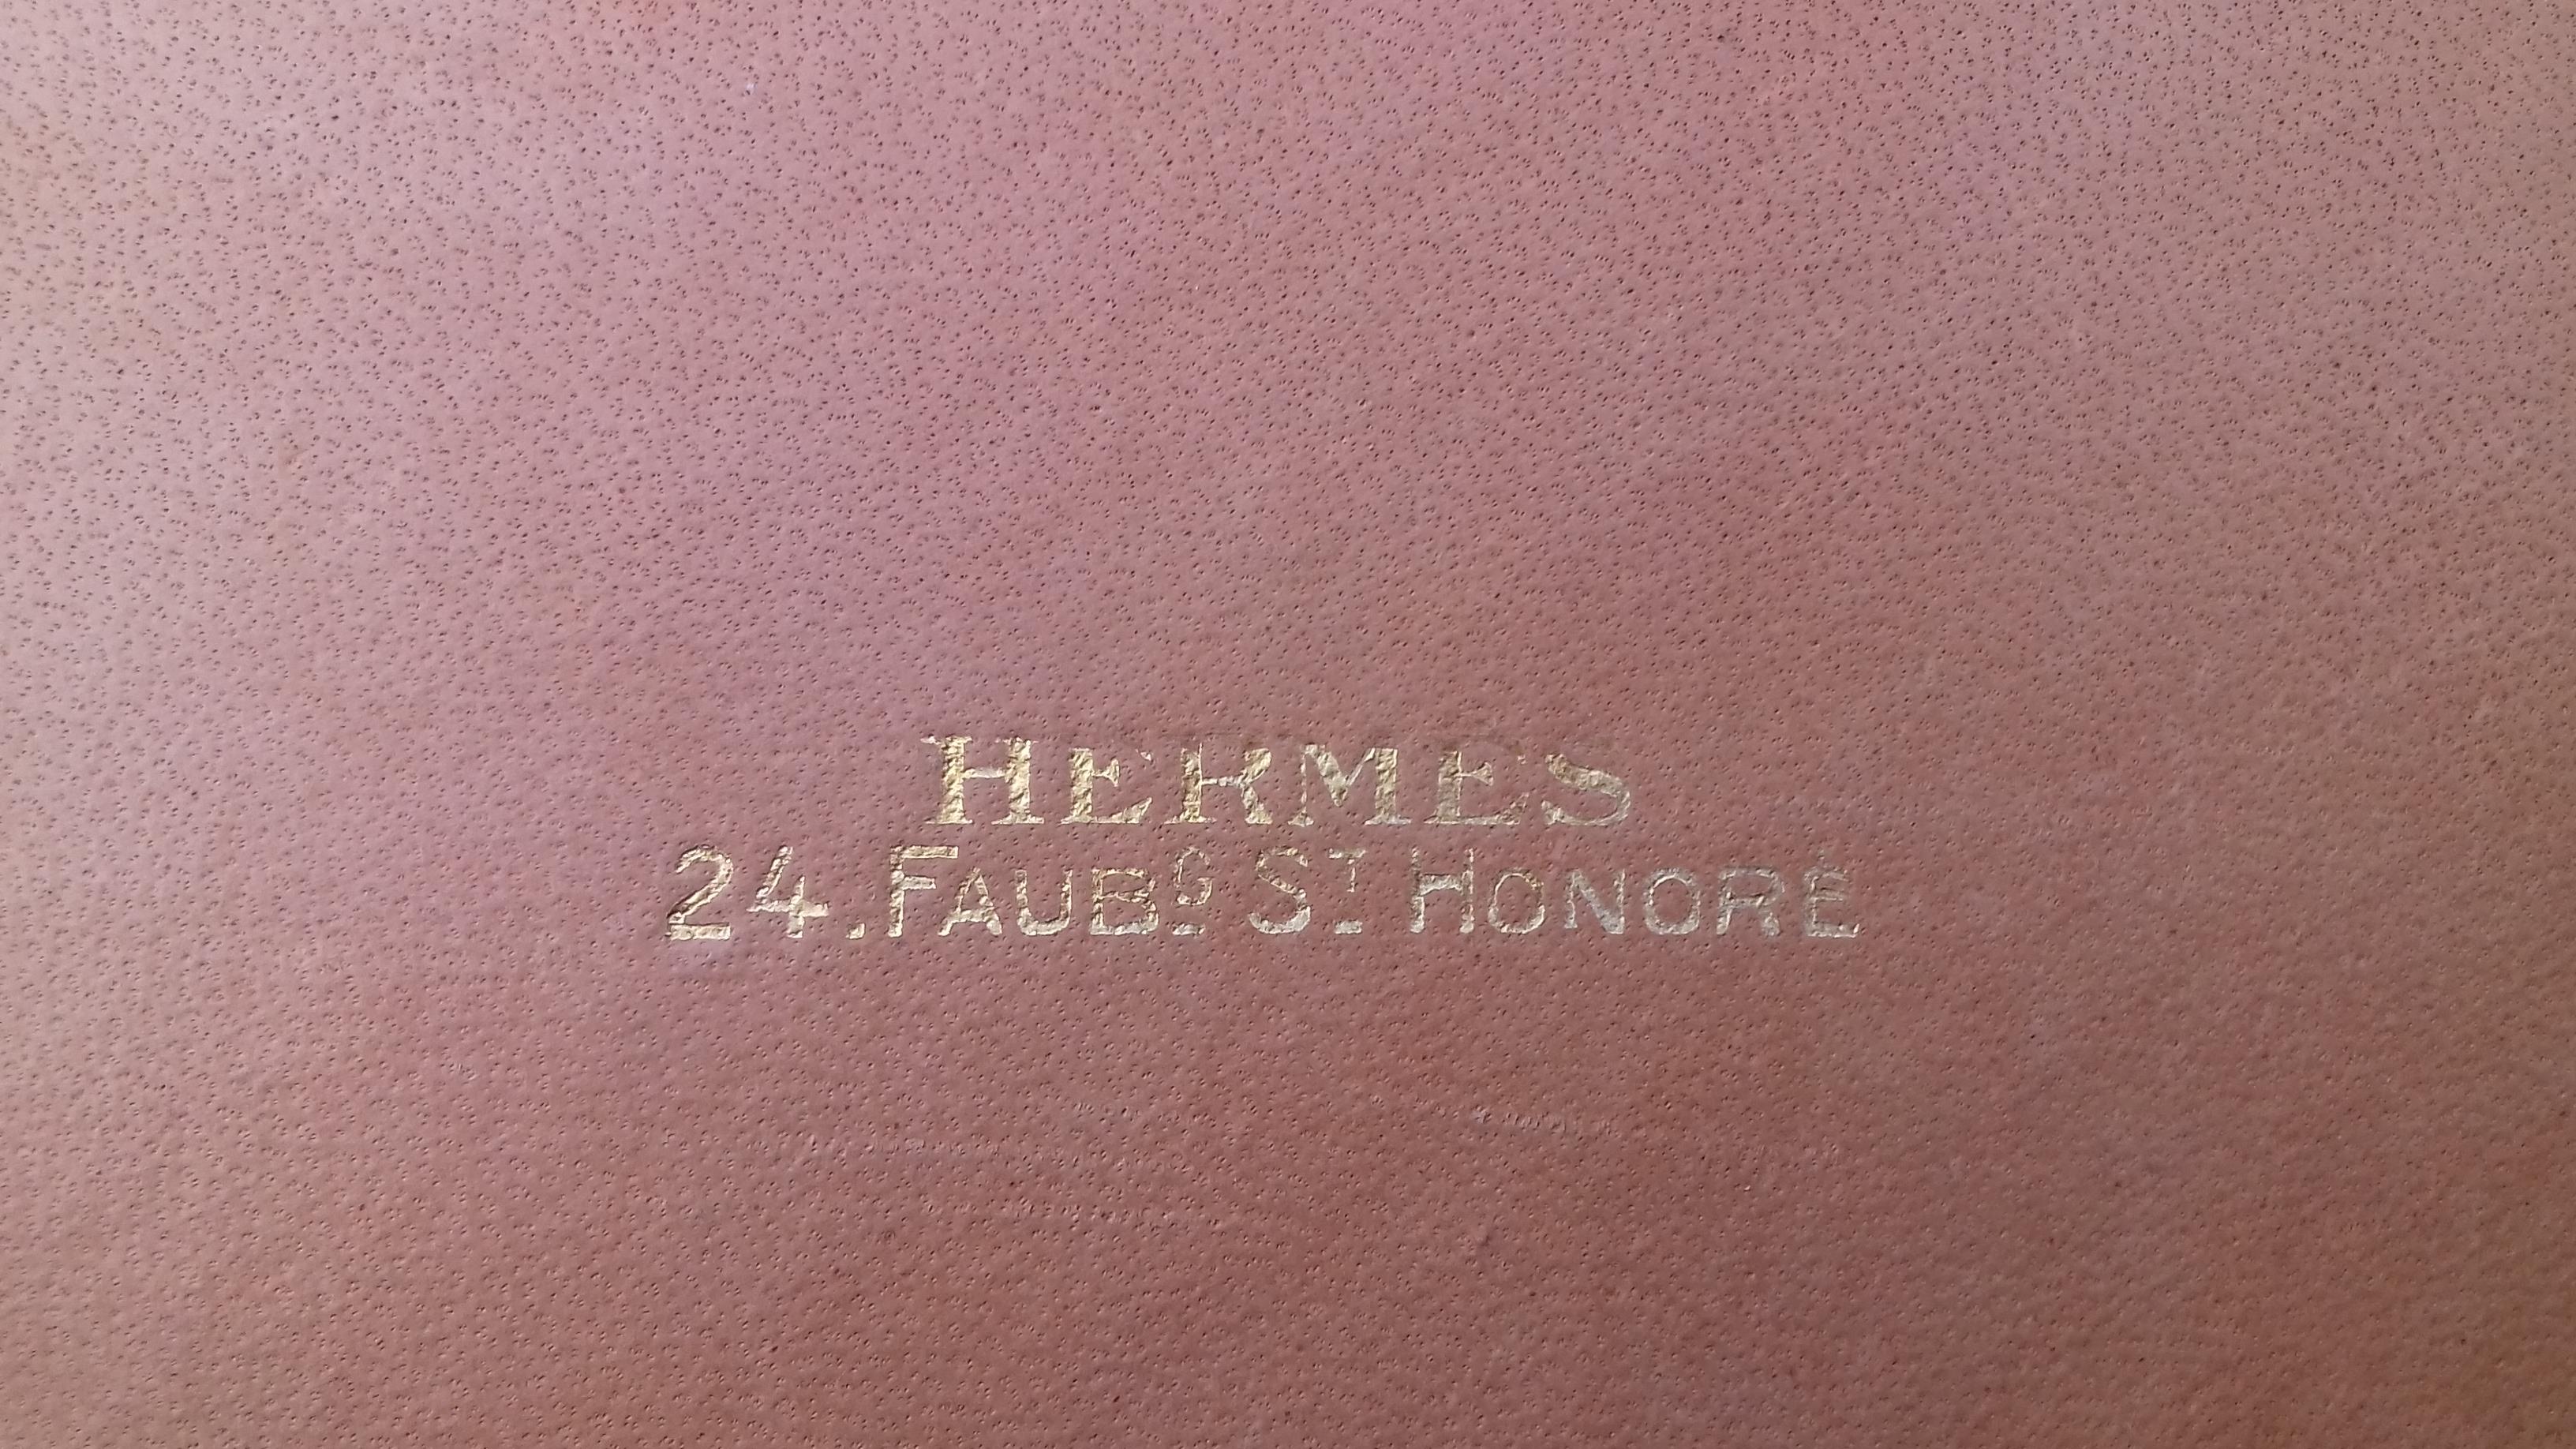 Exceptional Hermès and Paul Jouve Leather Portfolio with Knocker Medor For Sale 8